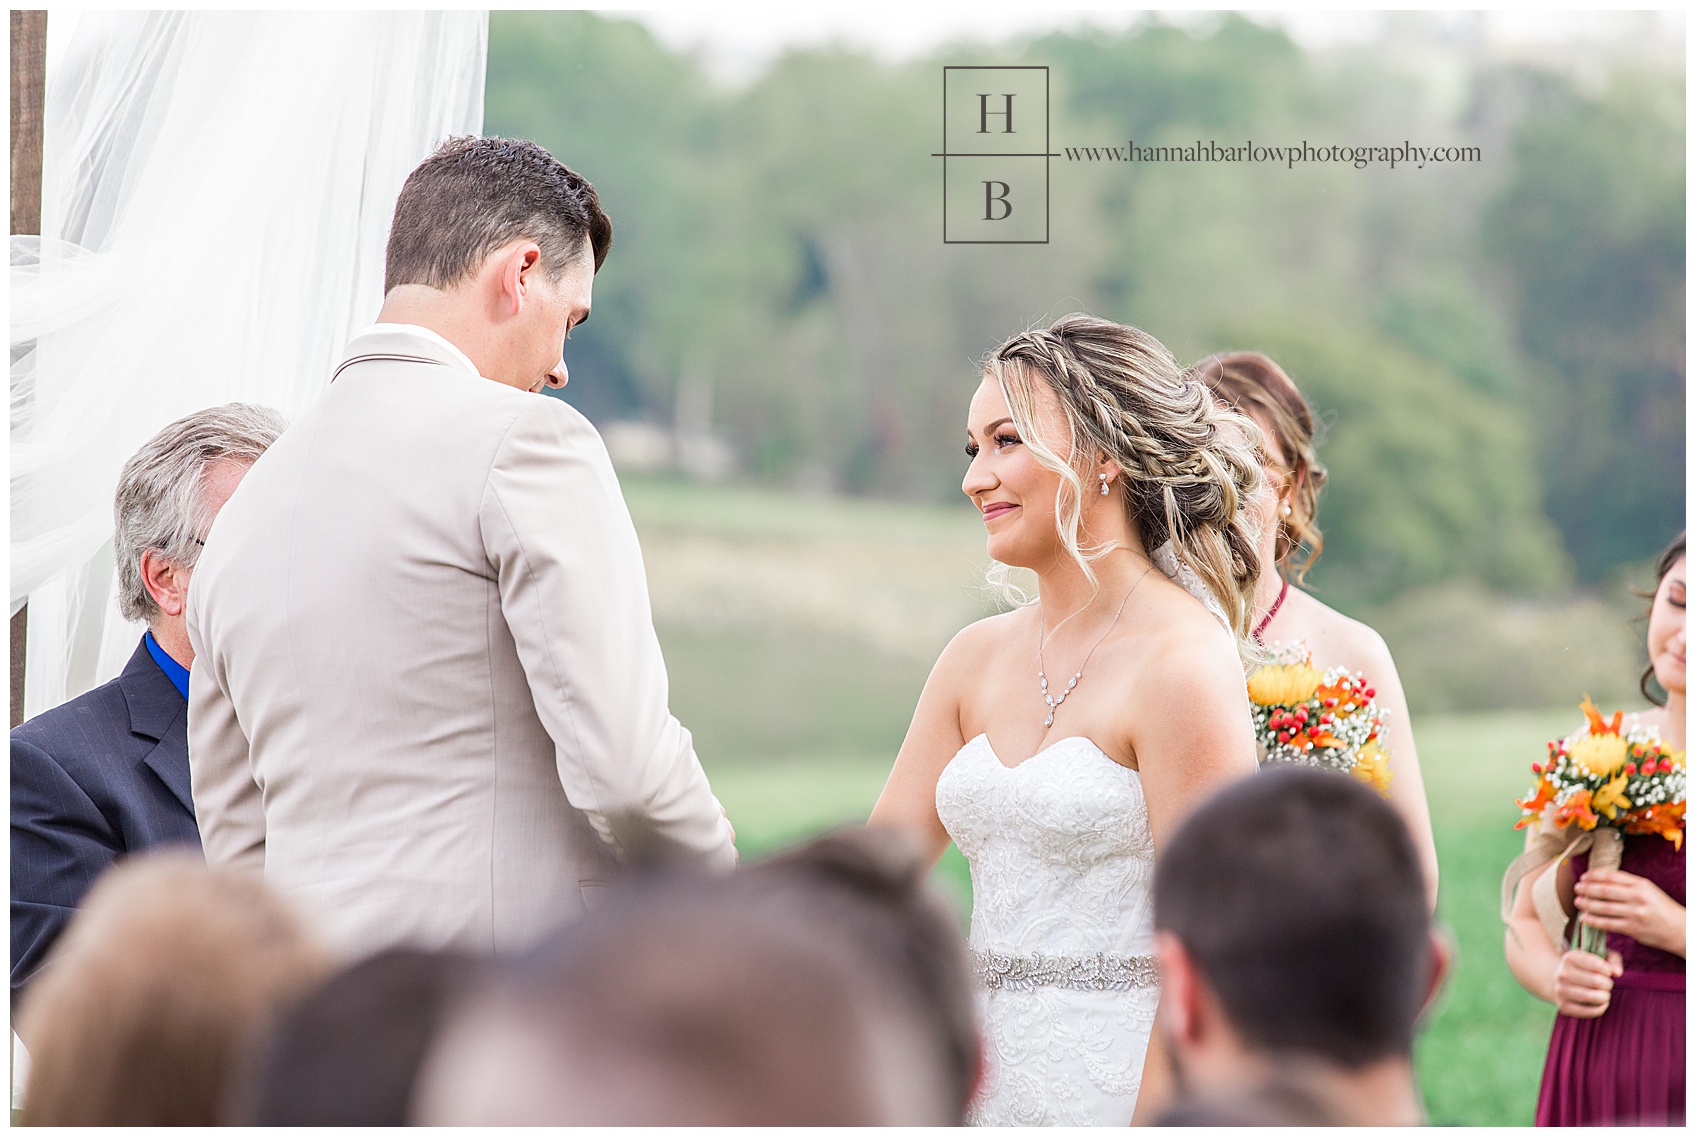 Bride Looking at Groom During Ceremony at Heaven Sent Farms